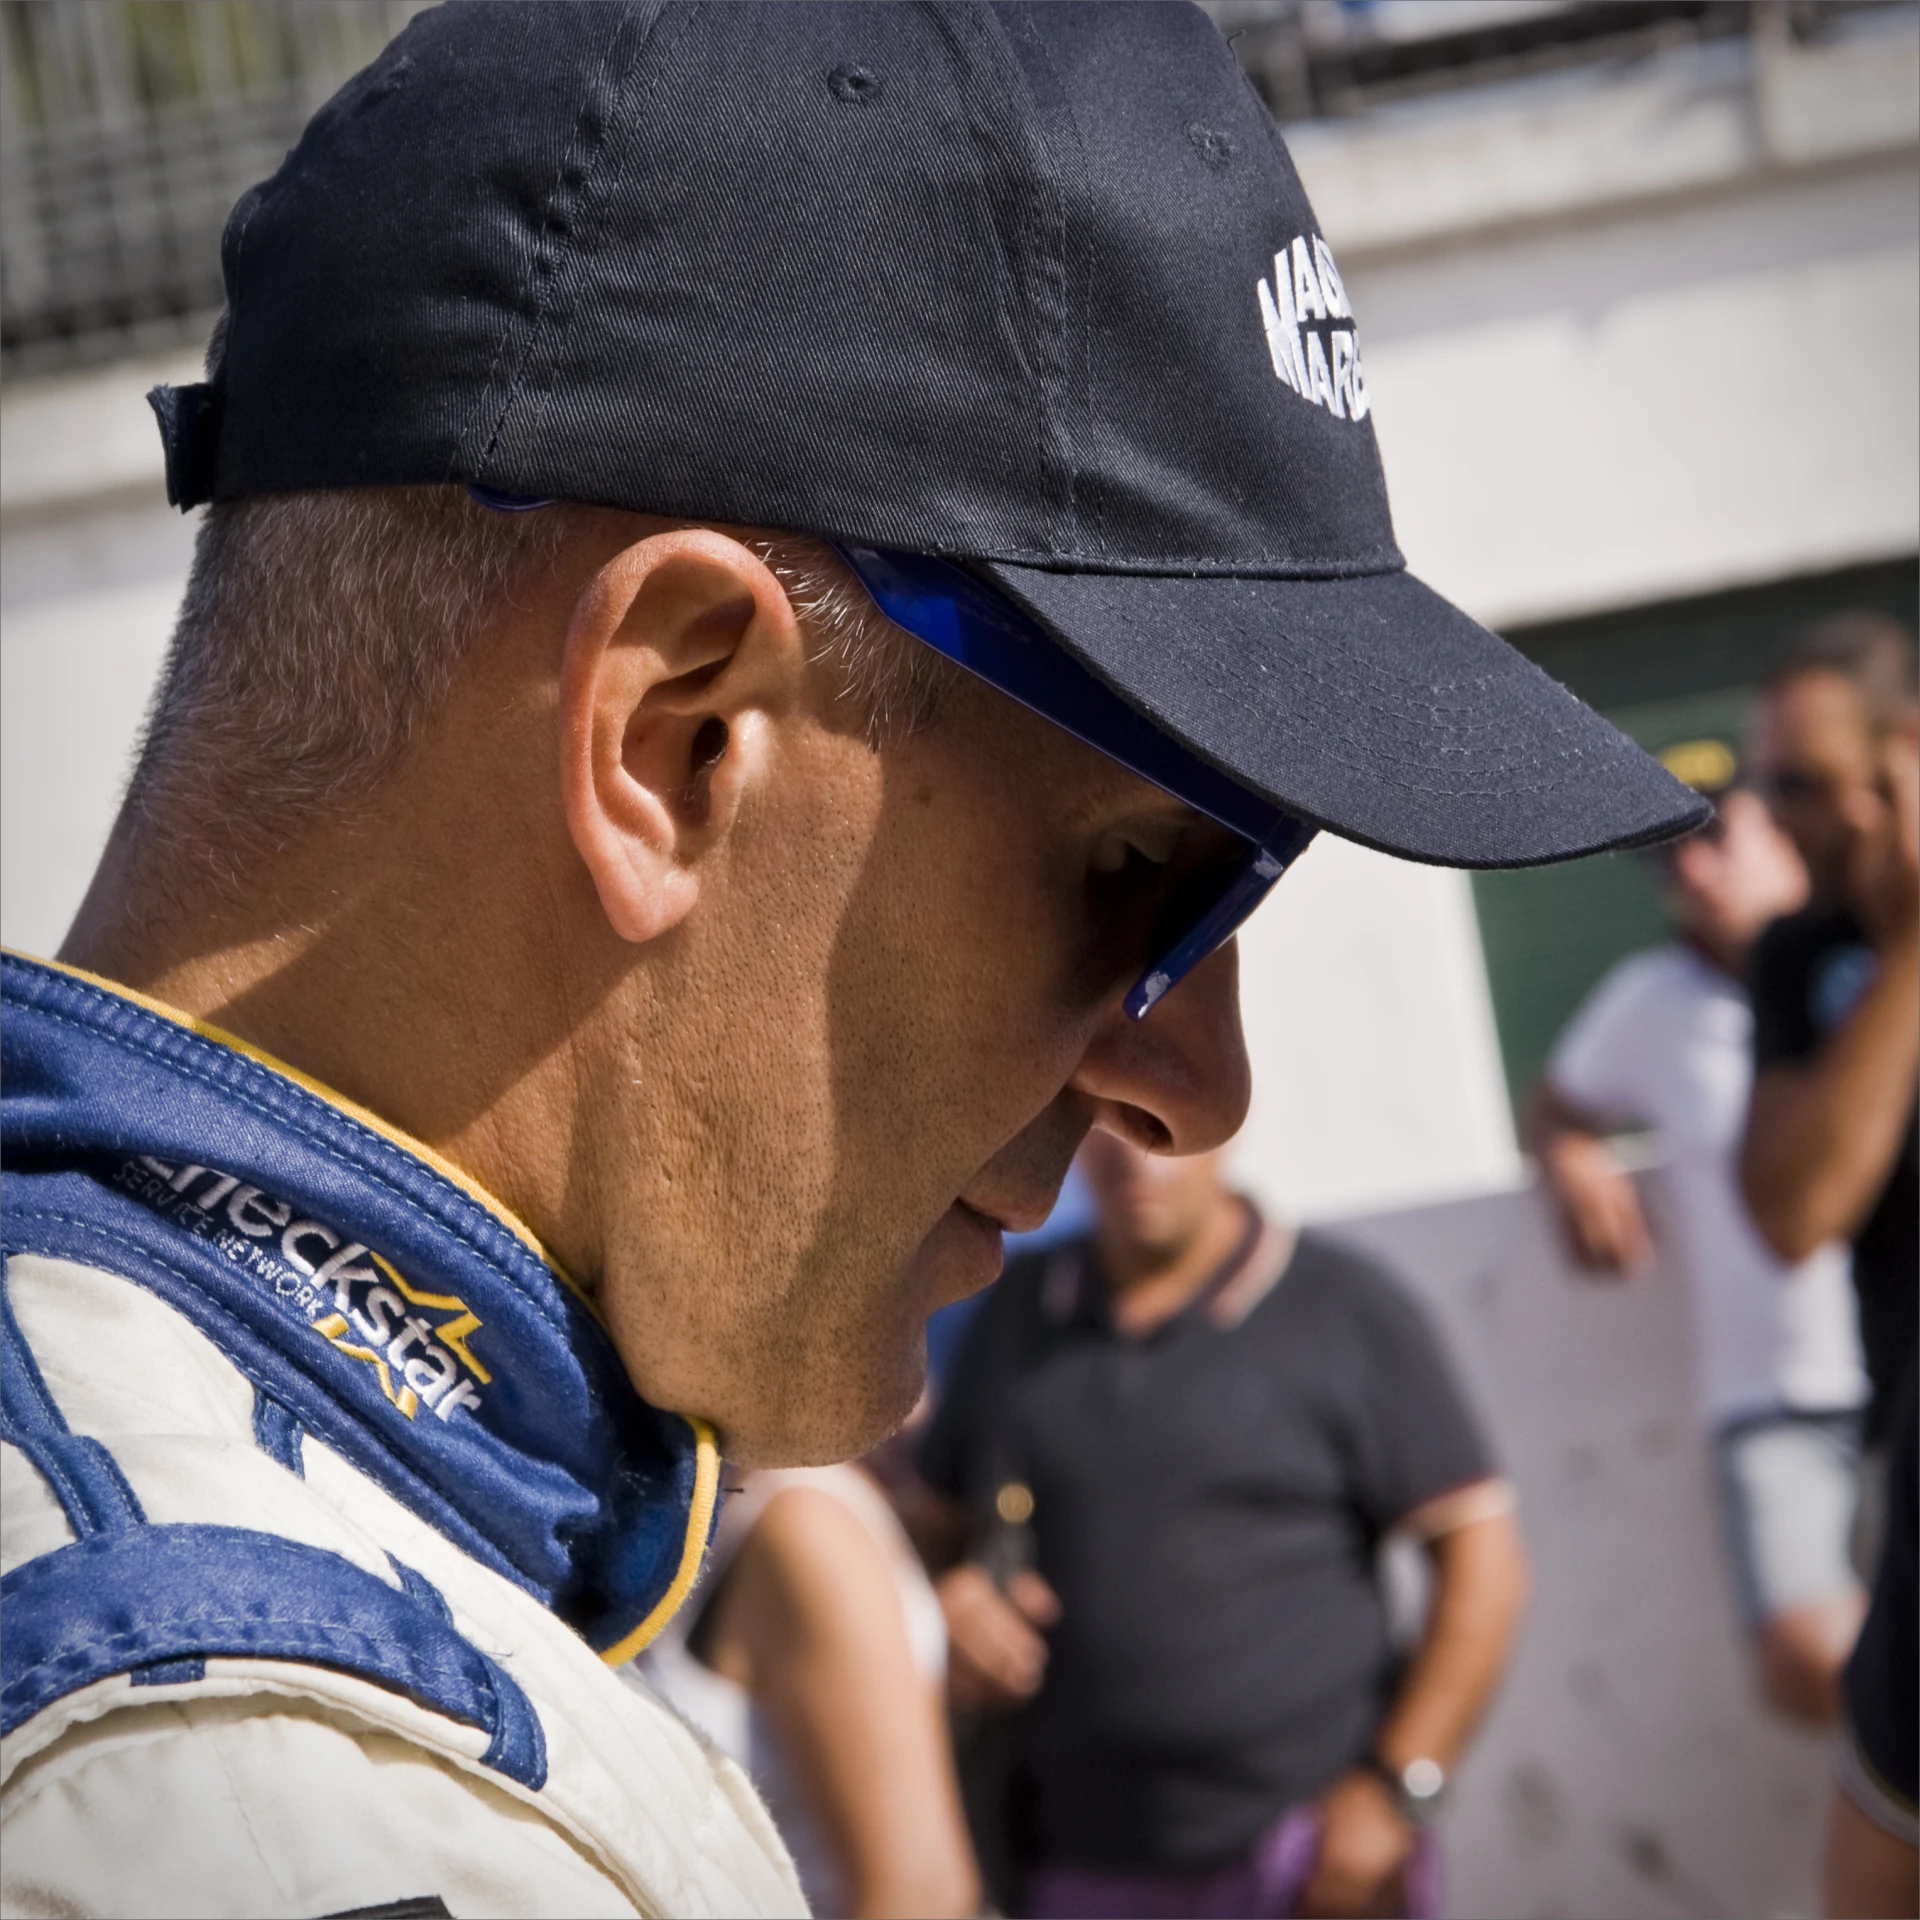 man in a racing outfit holding a cell phone while other people talk on their cell phones